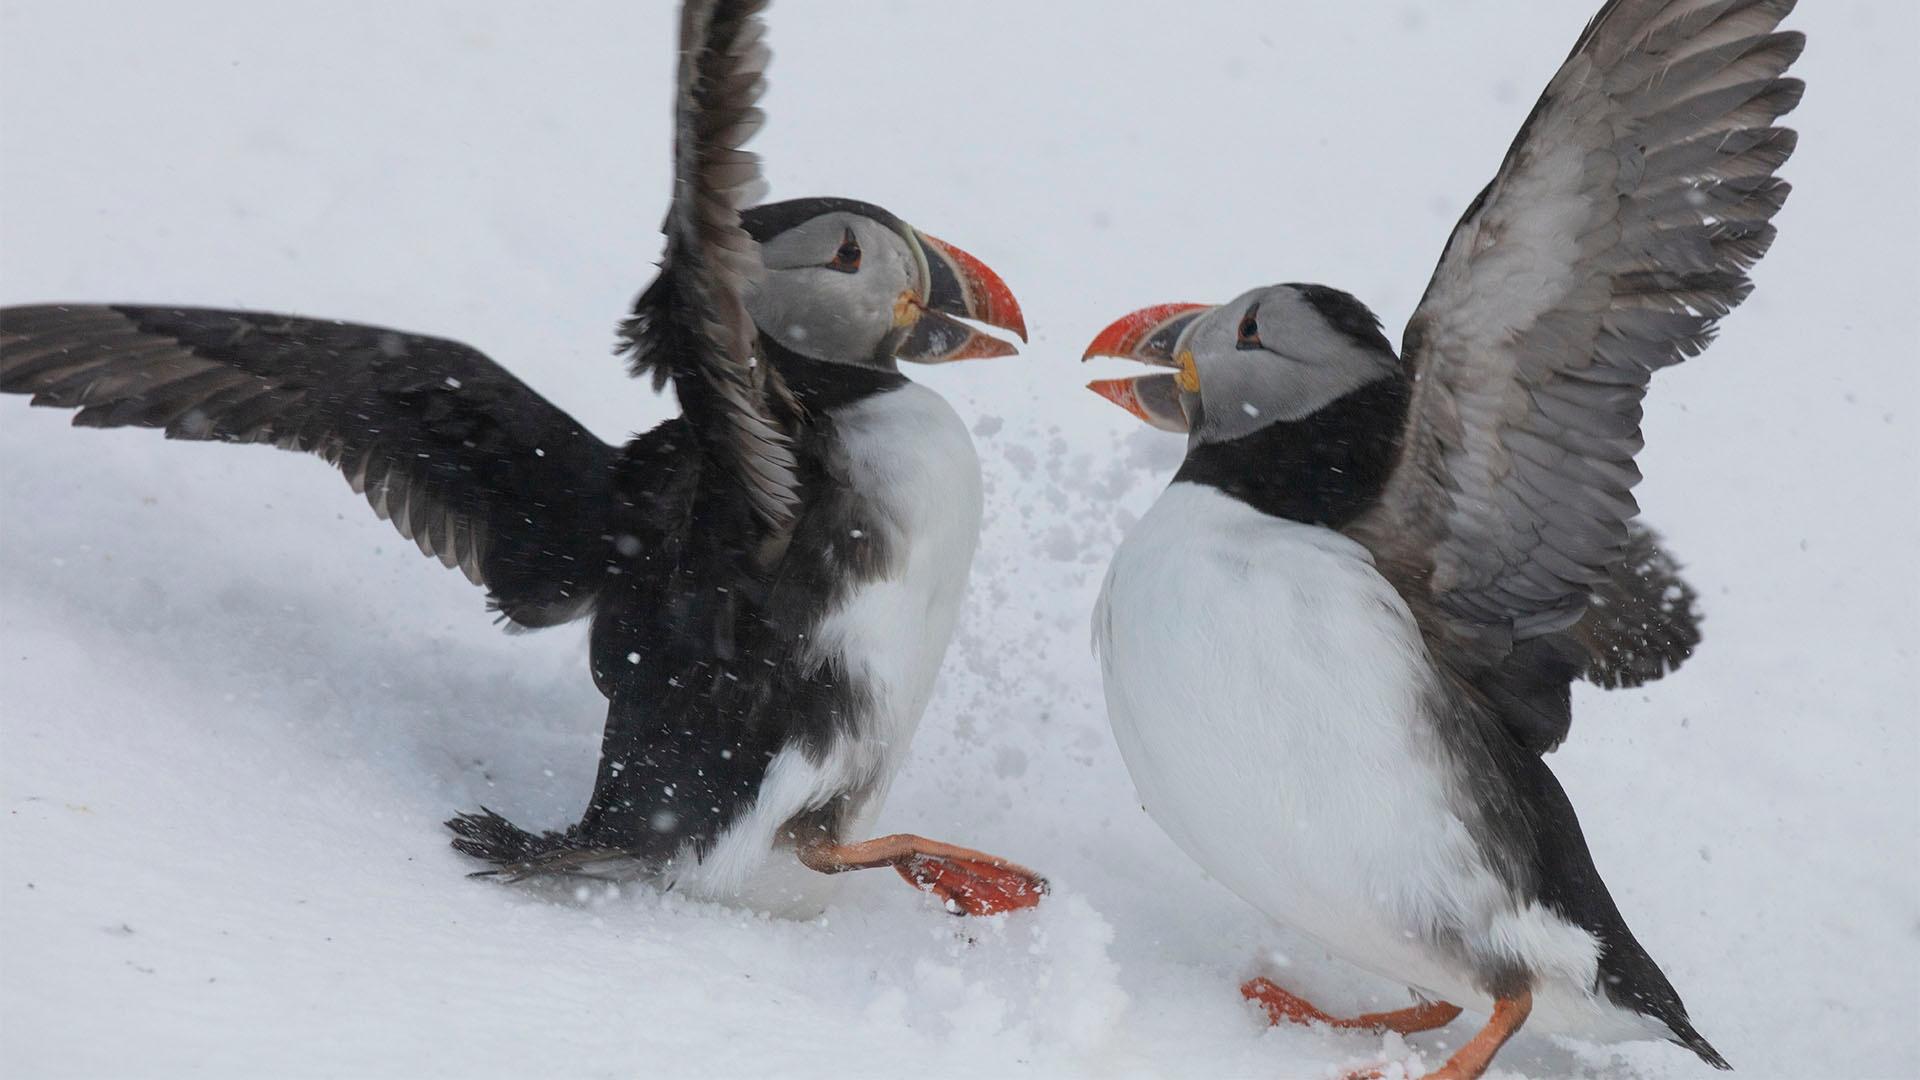 Image of two Atlantic puffins fighting.